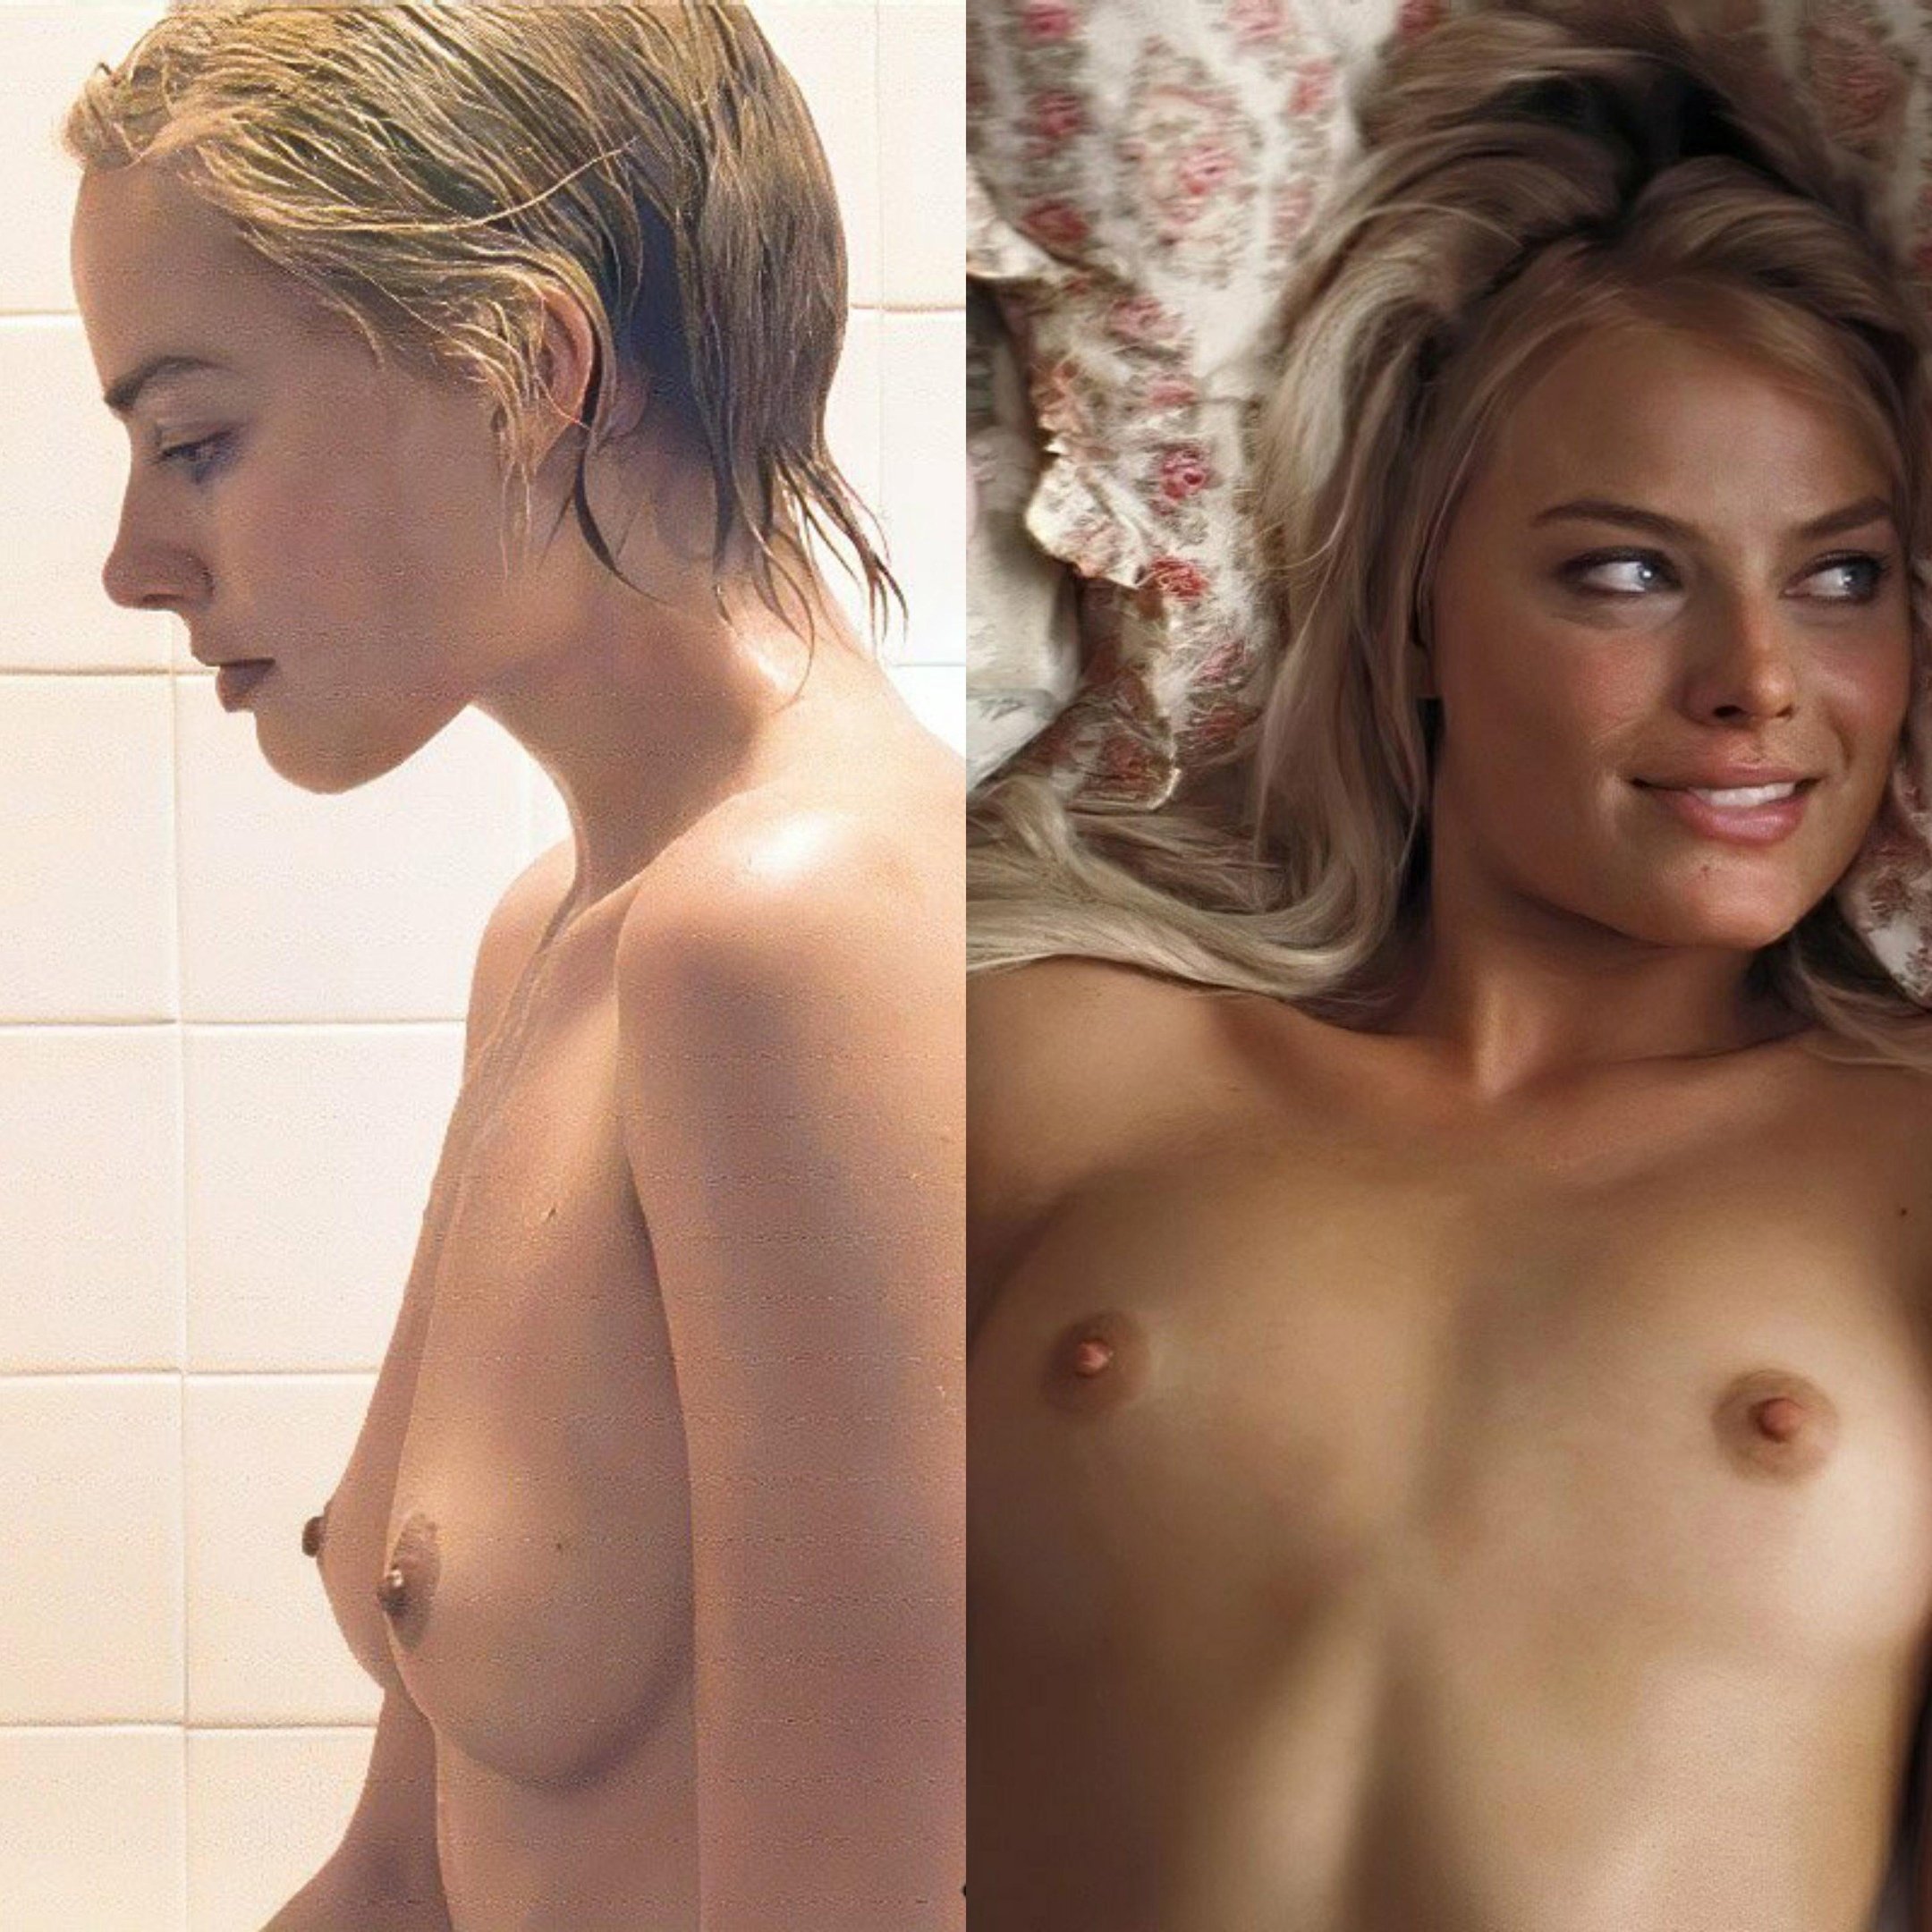 becky harbaugh recommends Margot Robbie Nude Pictures